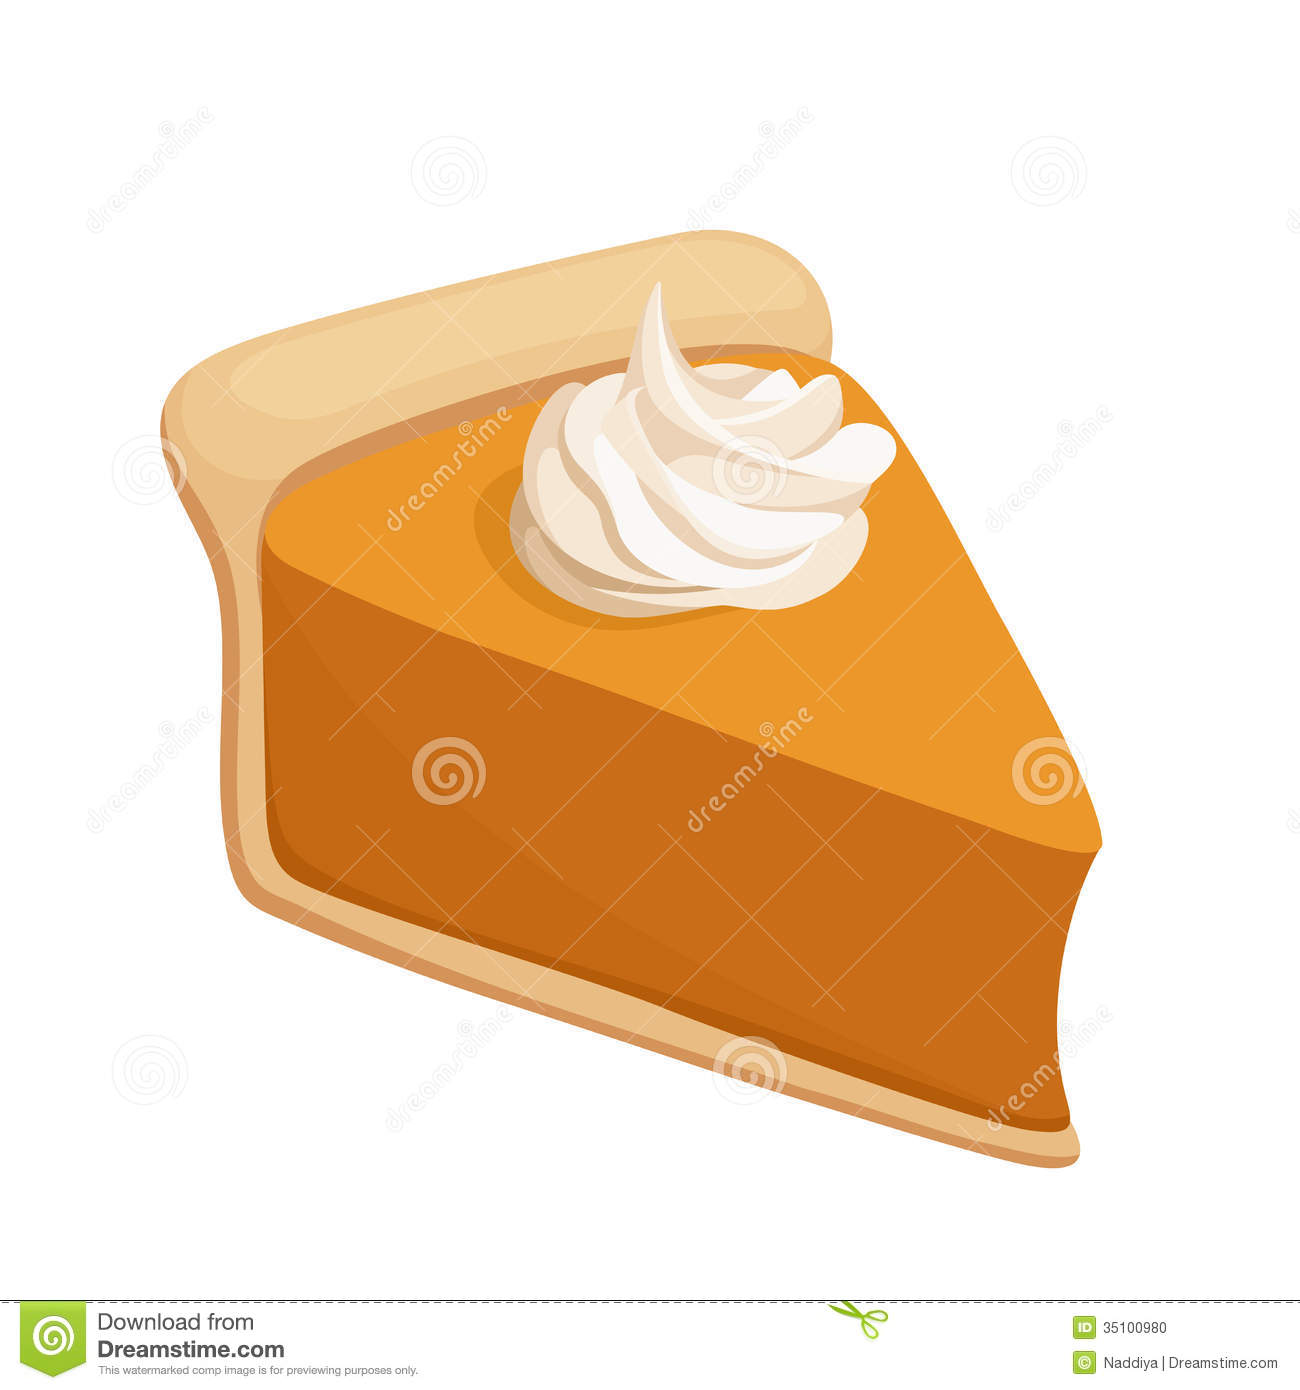 Illustration Of Slice Of Pumpkin Pie With Whipped Cream Isolated On A